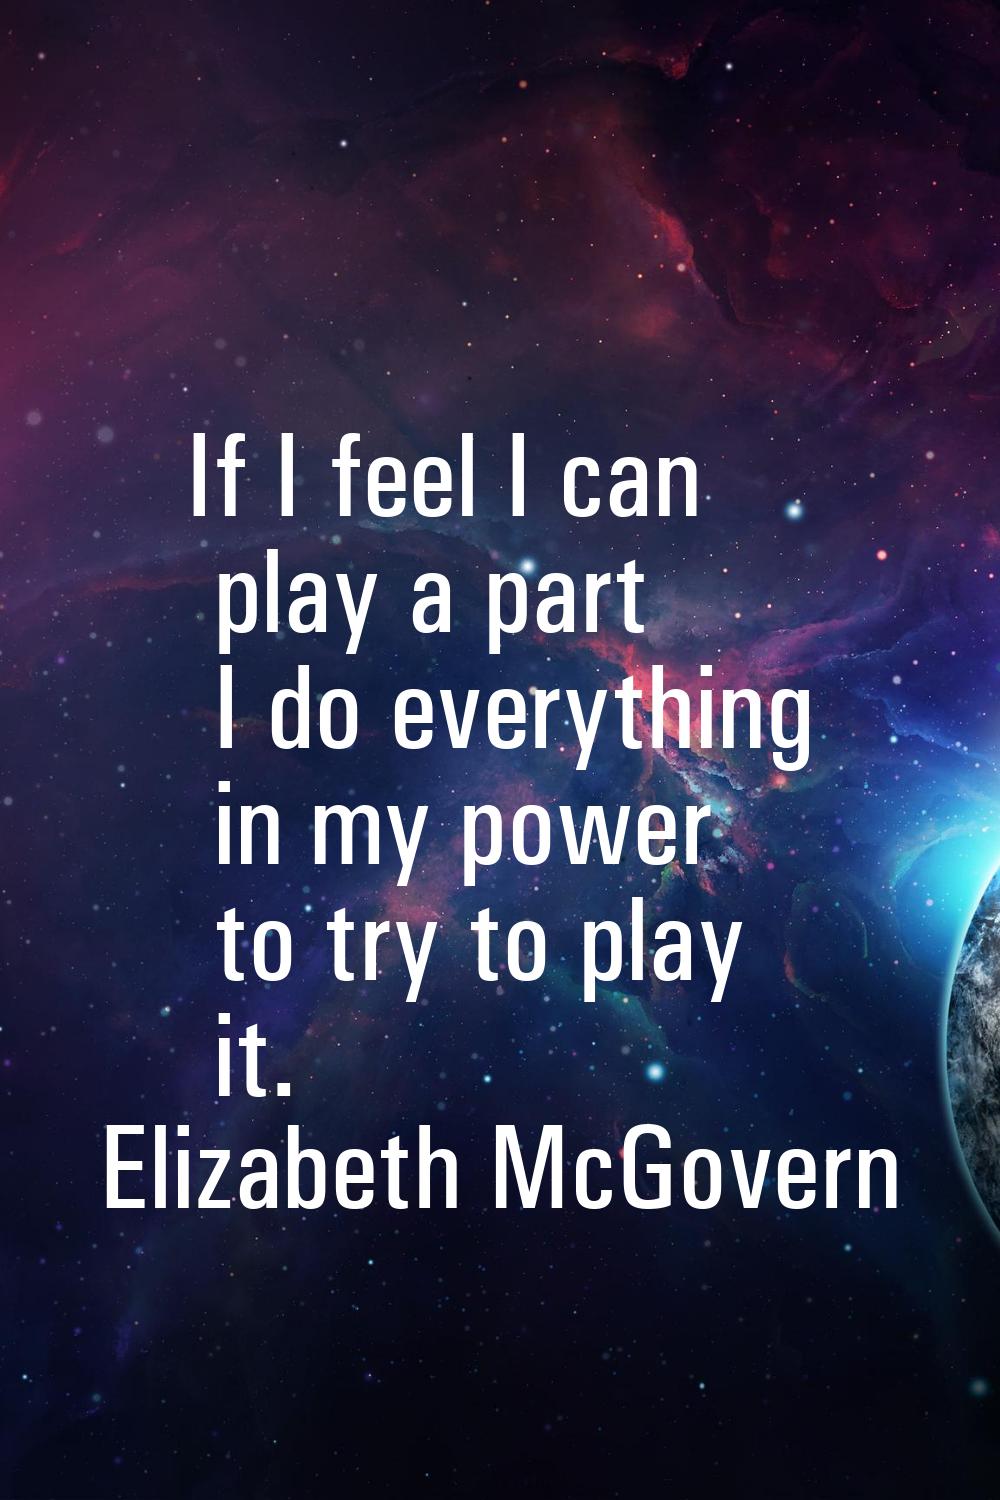 If I feel I can play a part I do everything in my power to try to play it.